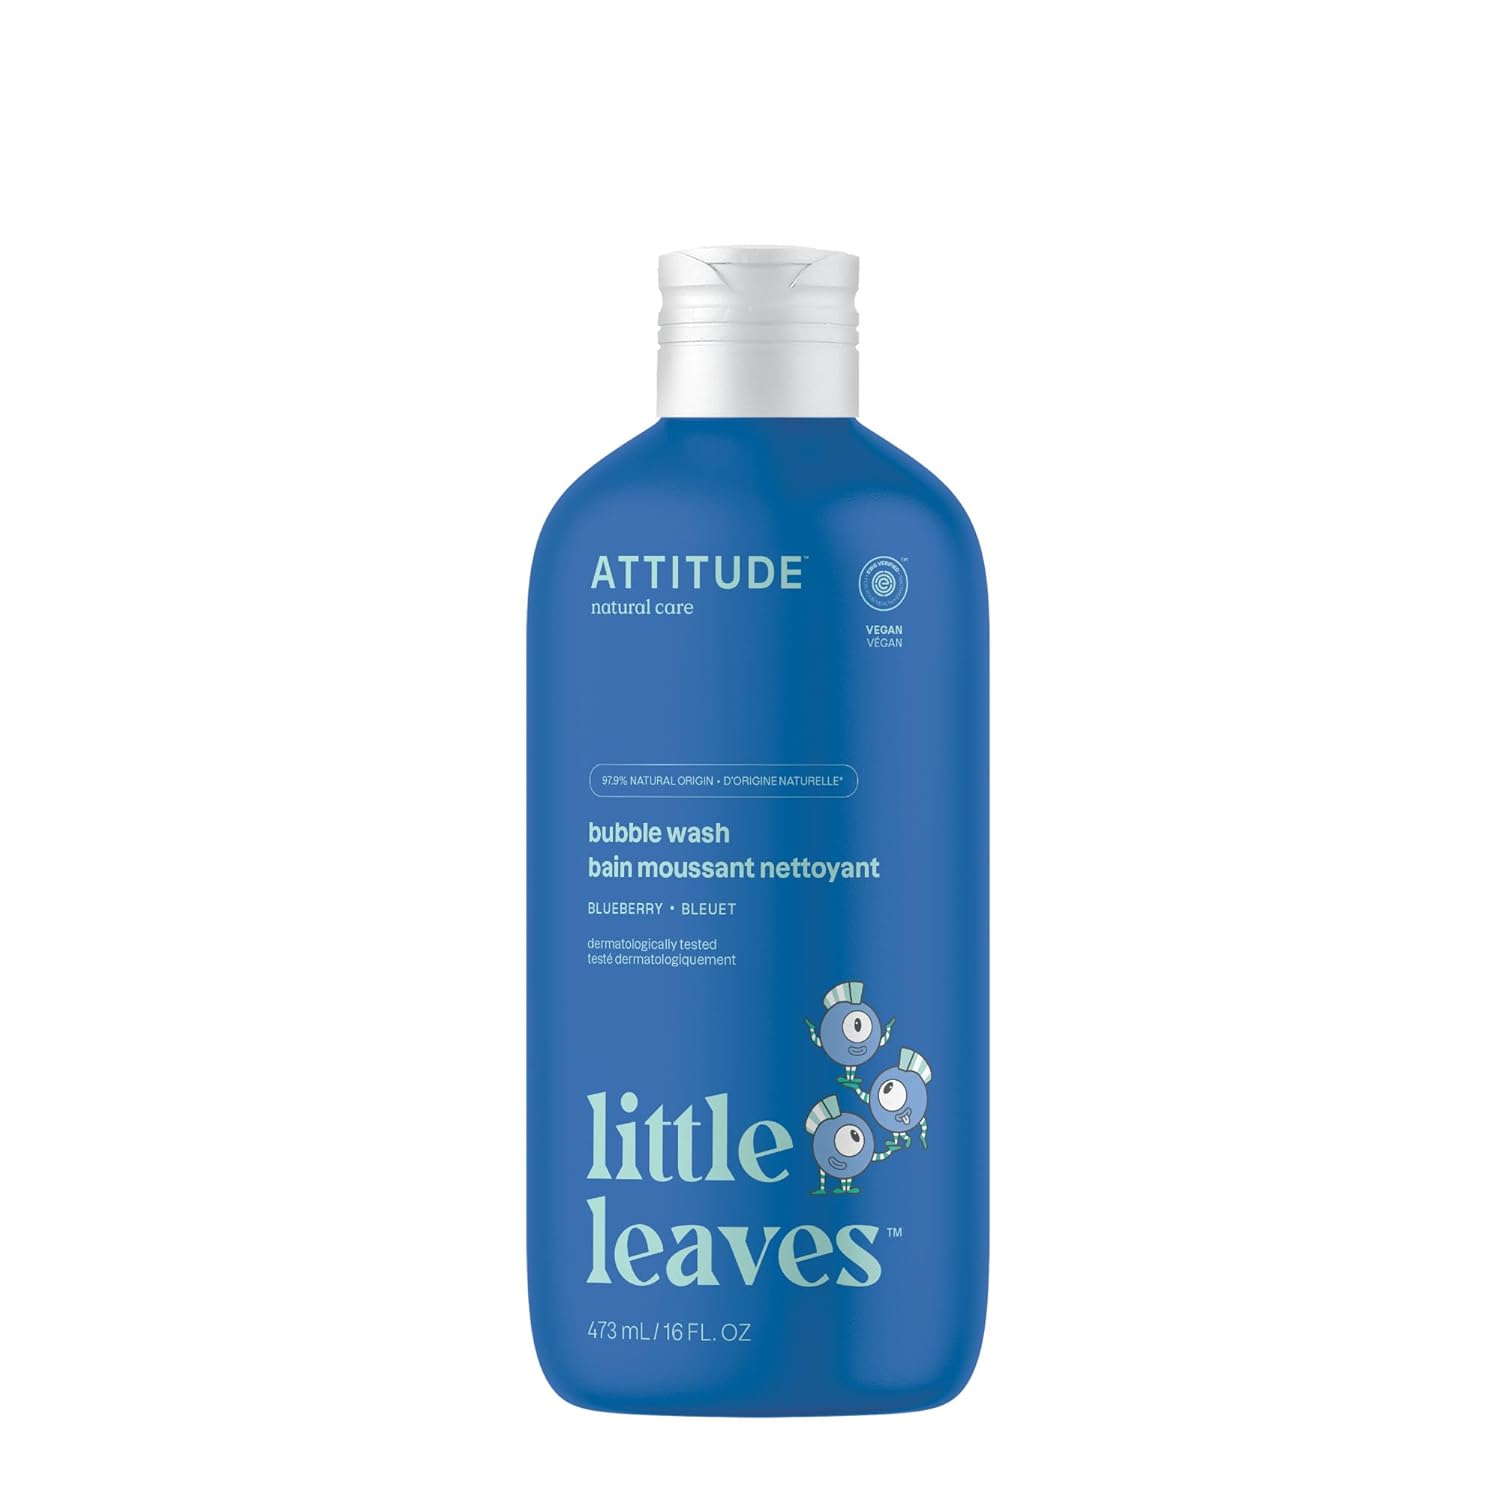 ATTITUDE Bubble Wash for Kids, Hair Shampoo and Body Soap, EWG Verified, Plant- and Mineral-Based, Vegan, Blueberry, 16 Fl Oz